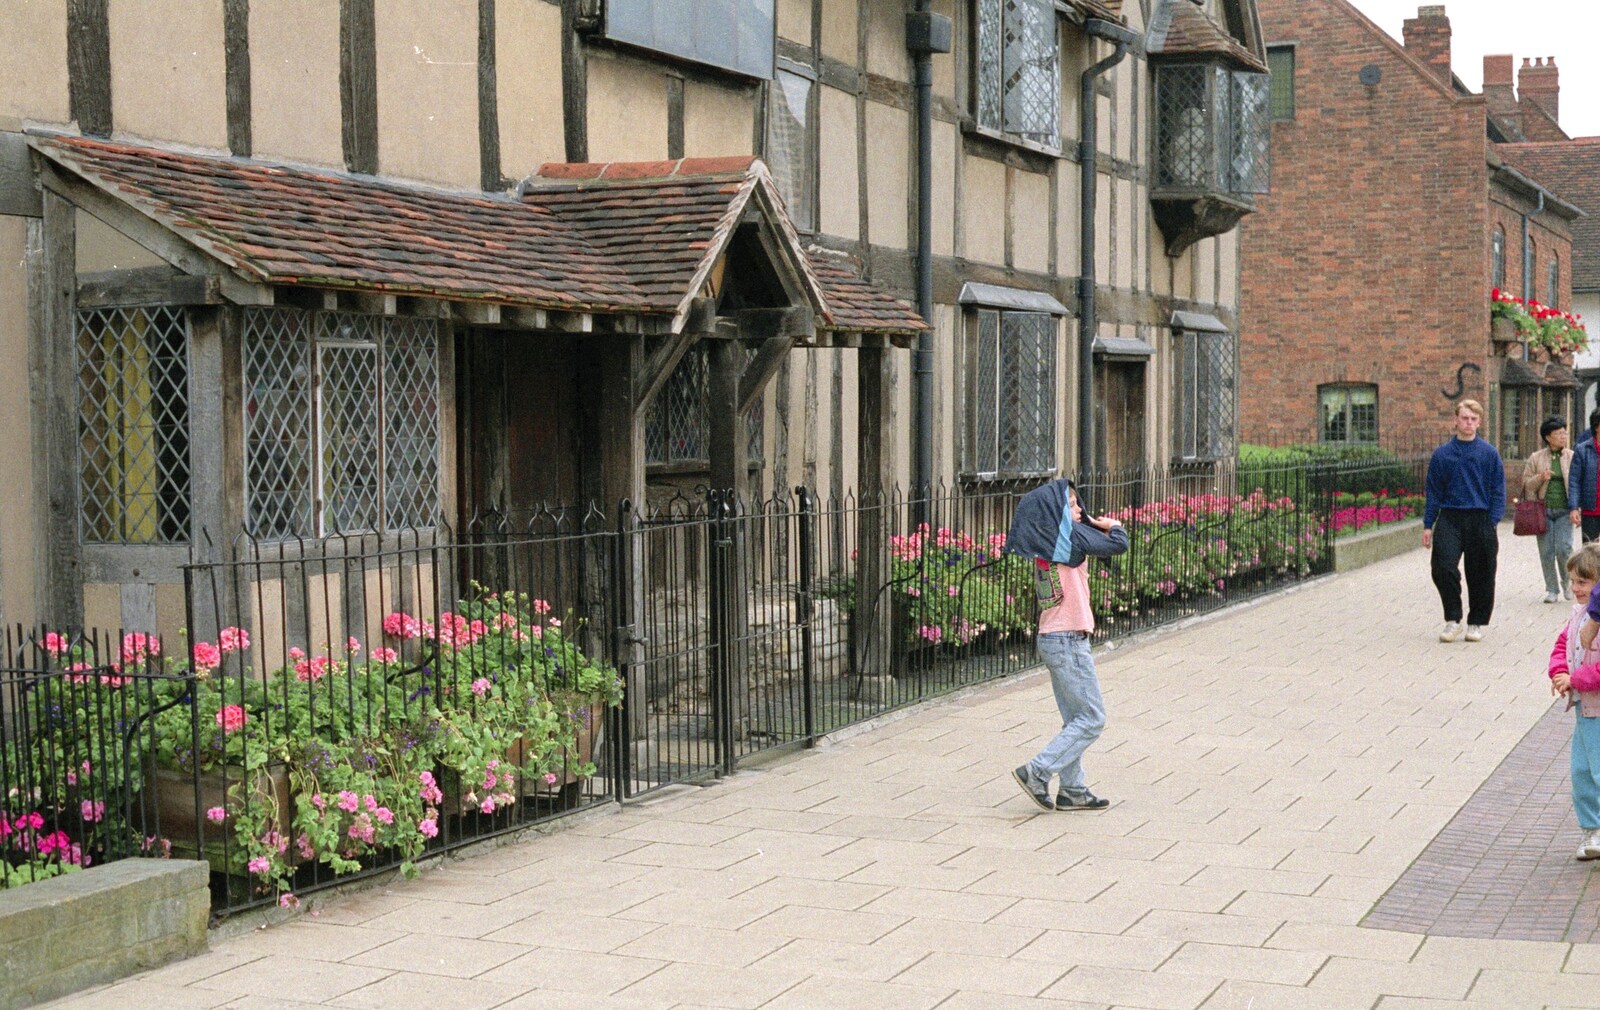 A Trip to Stratford-Upon-Avon and Other Randomness, Warwickshire, Suffolk and Norfolk - 28th June 1991: A kid messes about in front of Bill's house